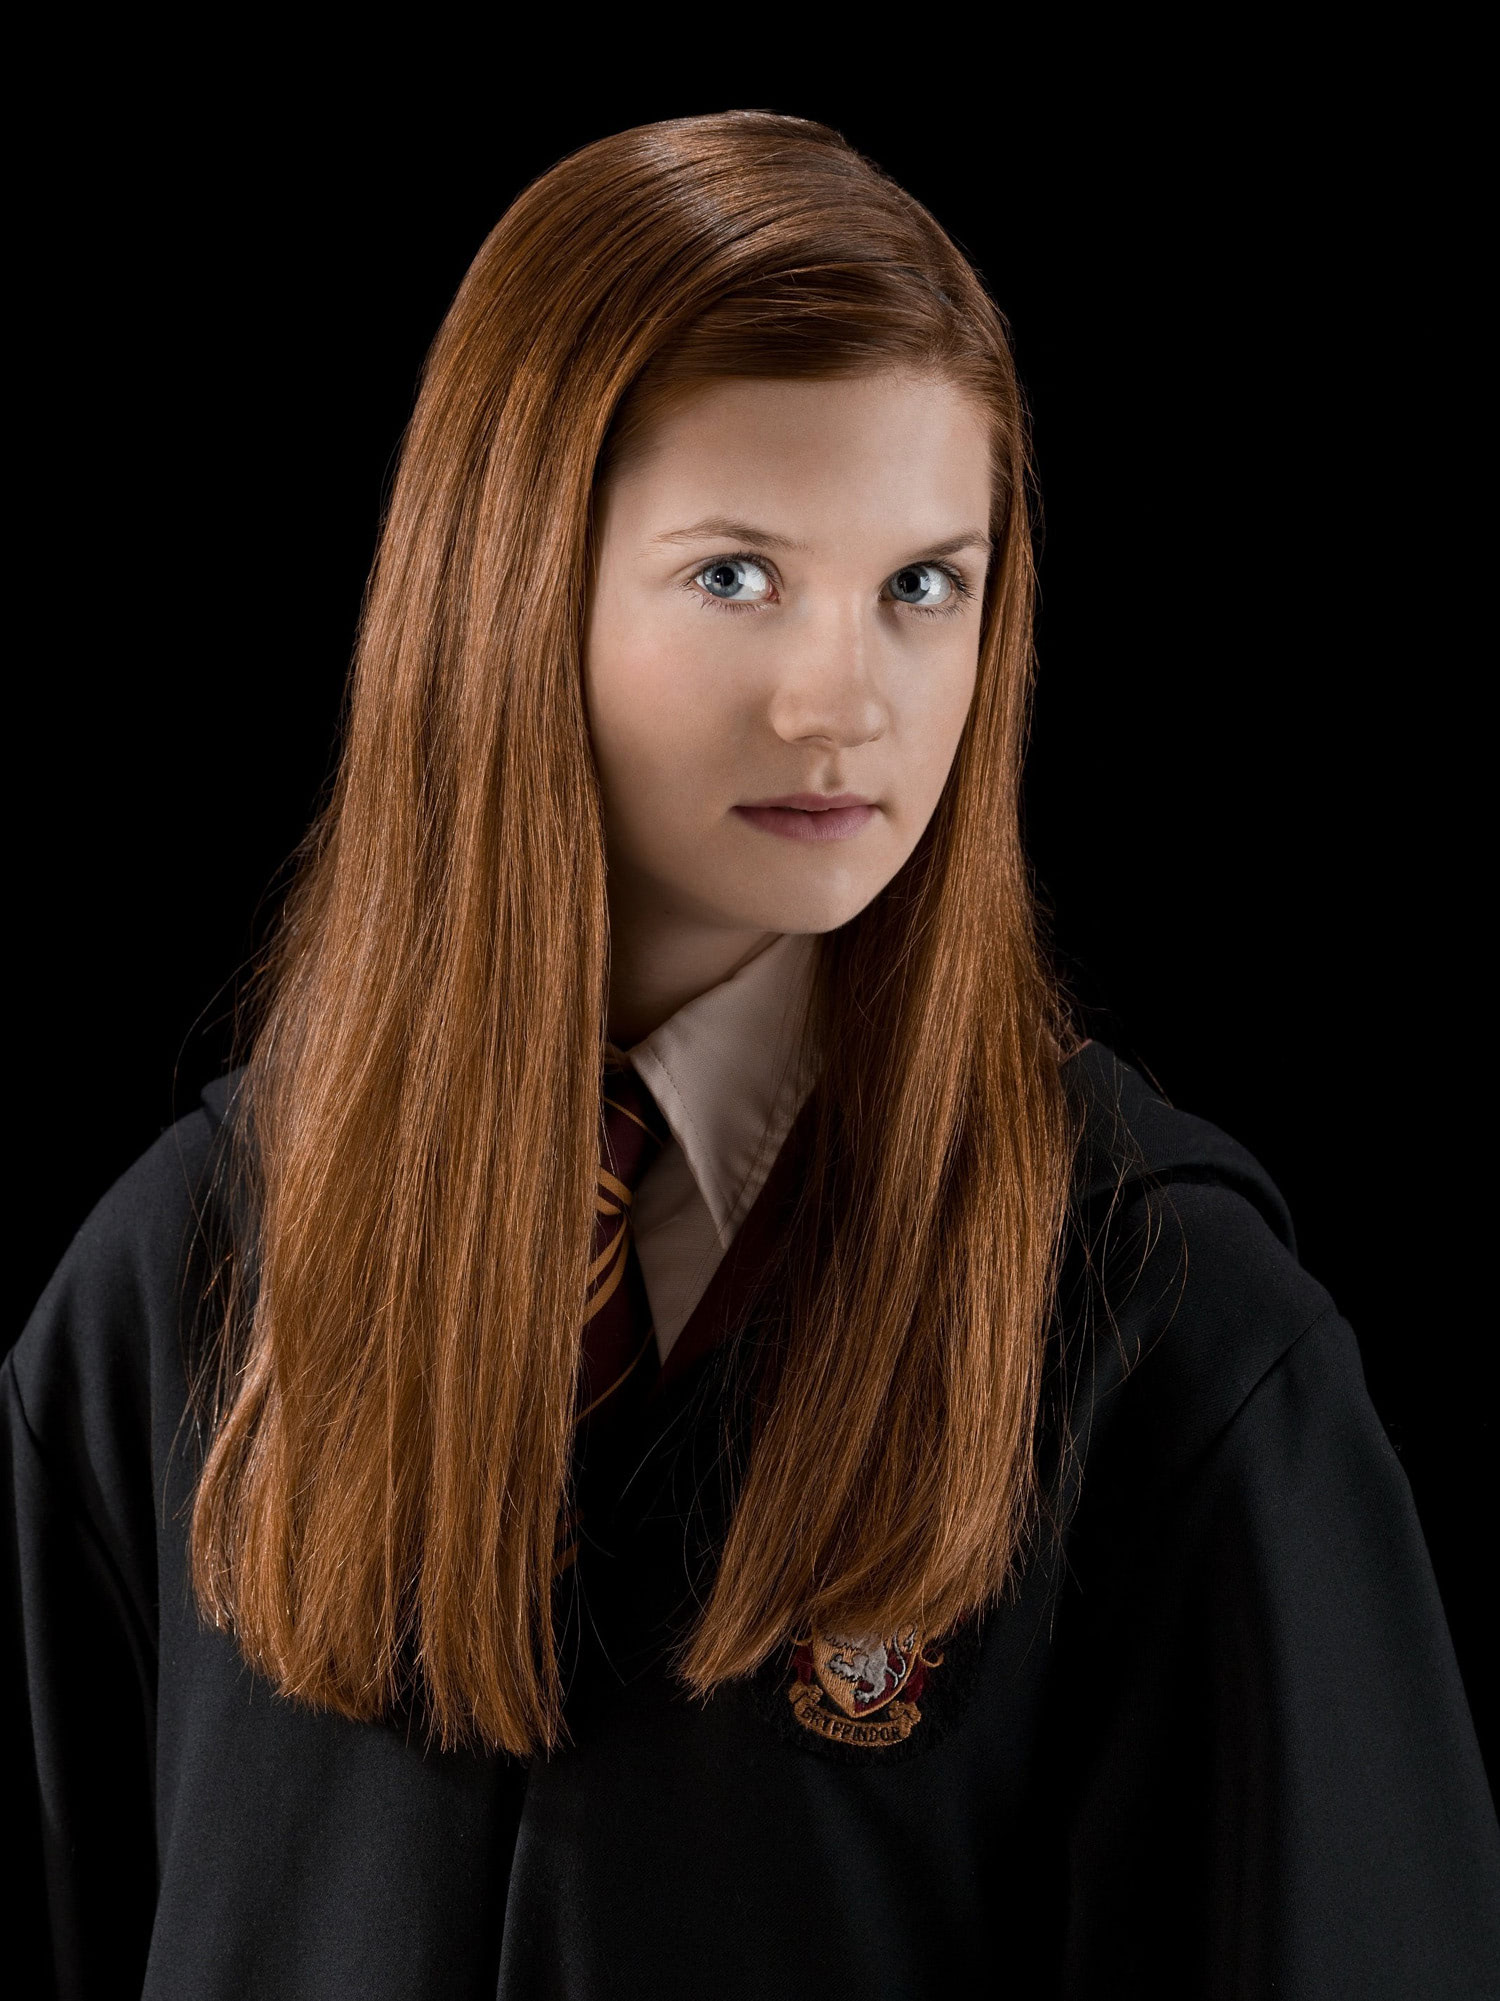 darcy donnelly recommends pictures of ginny weasley from harry potter pic